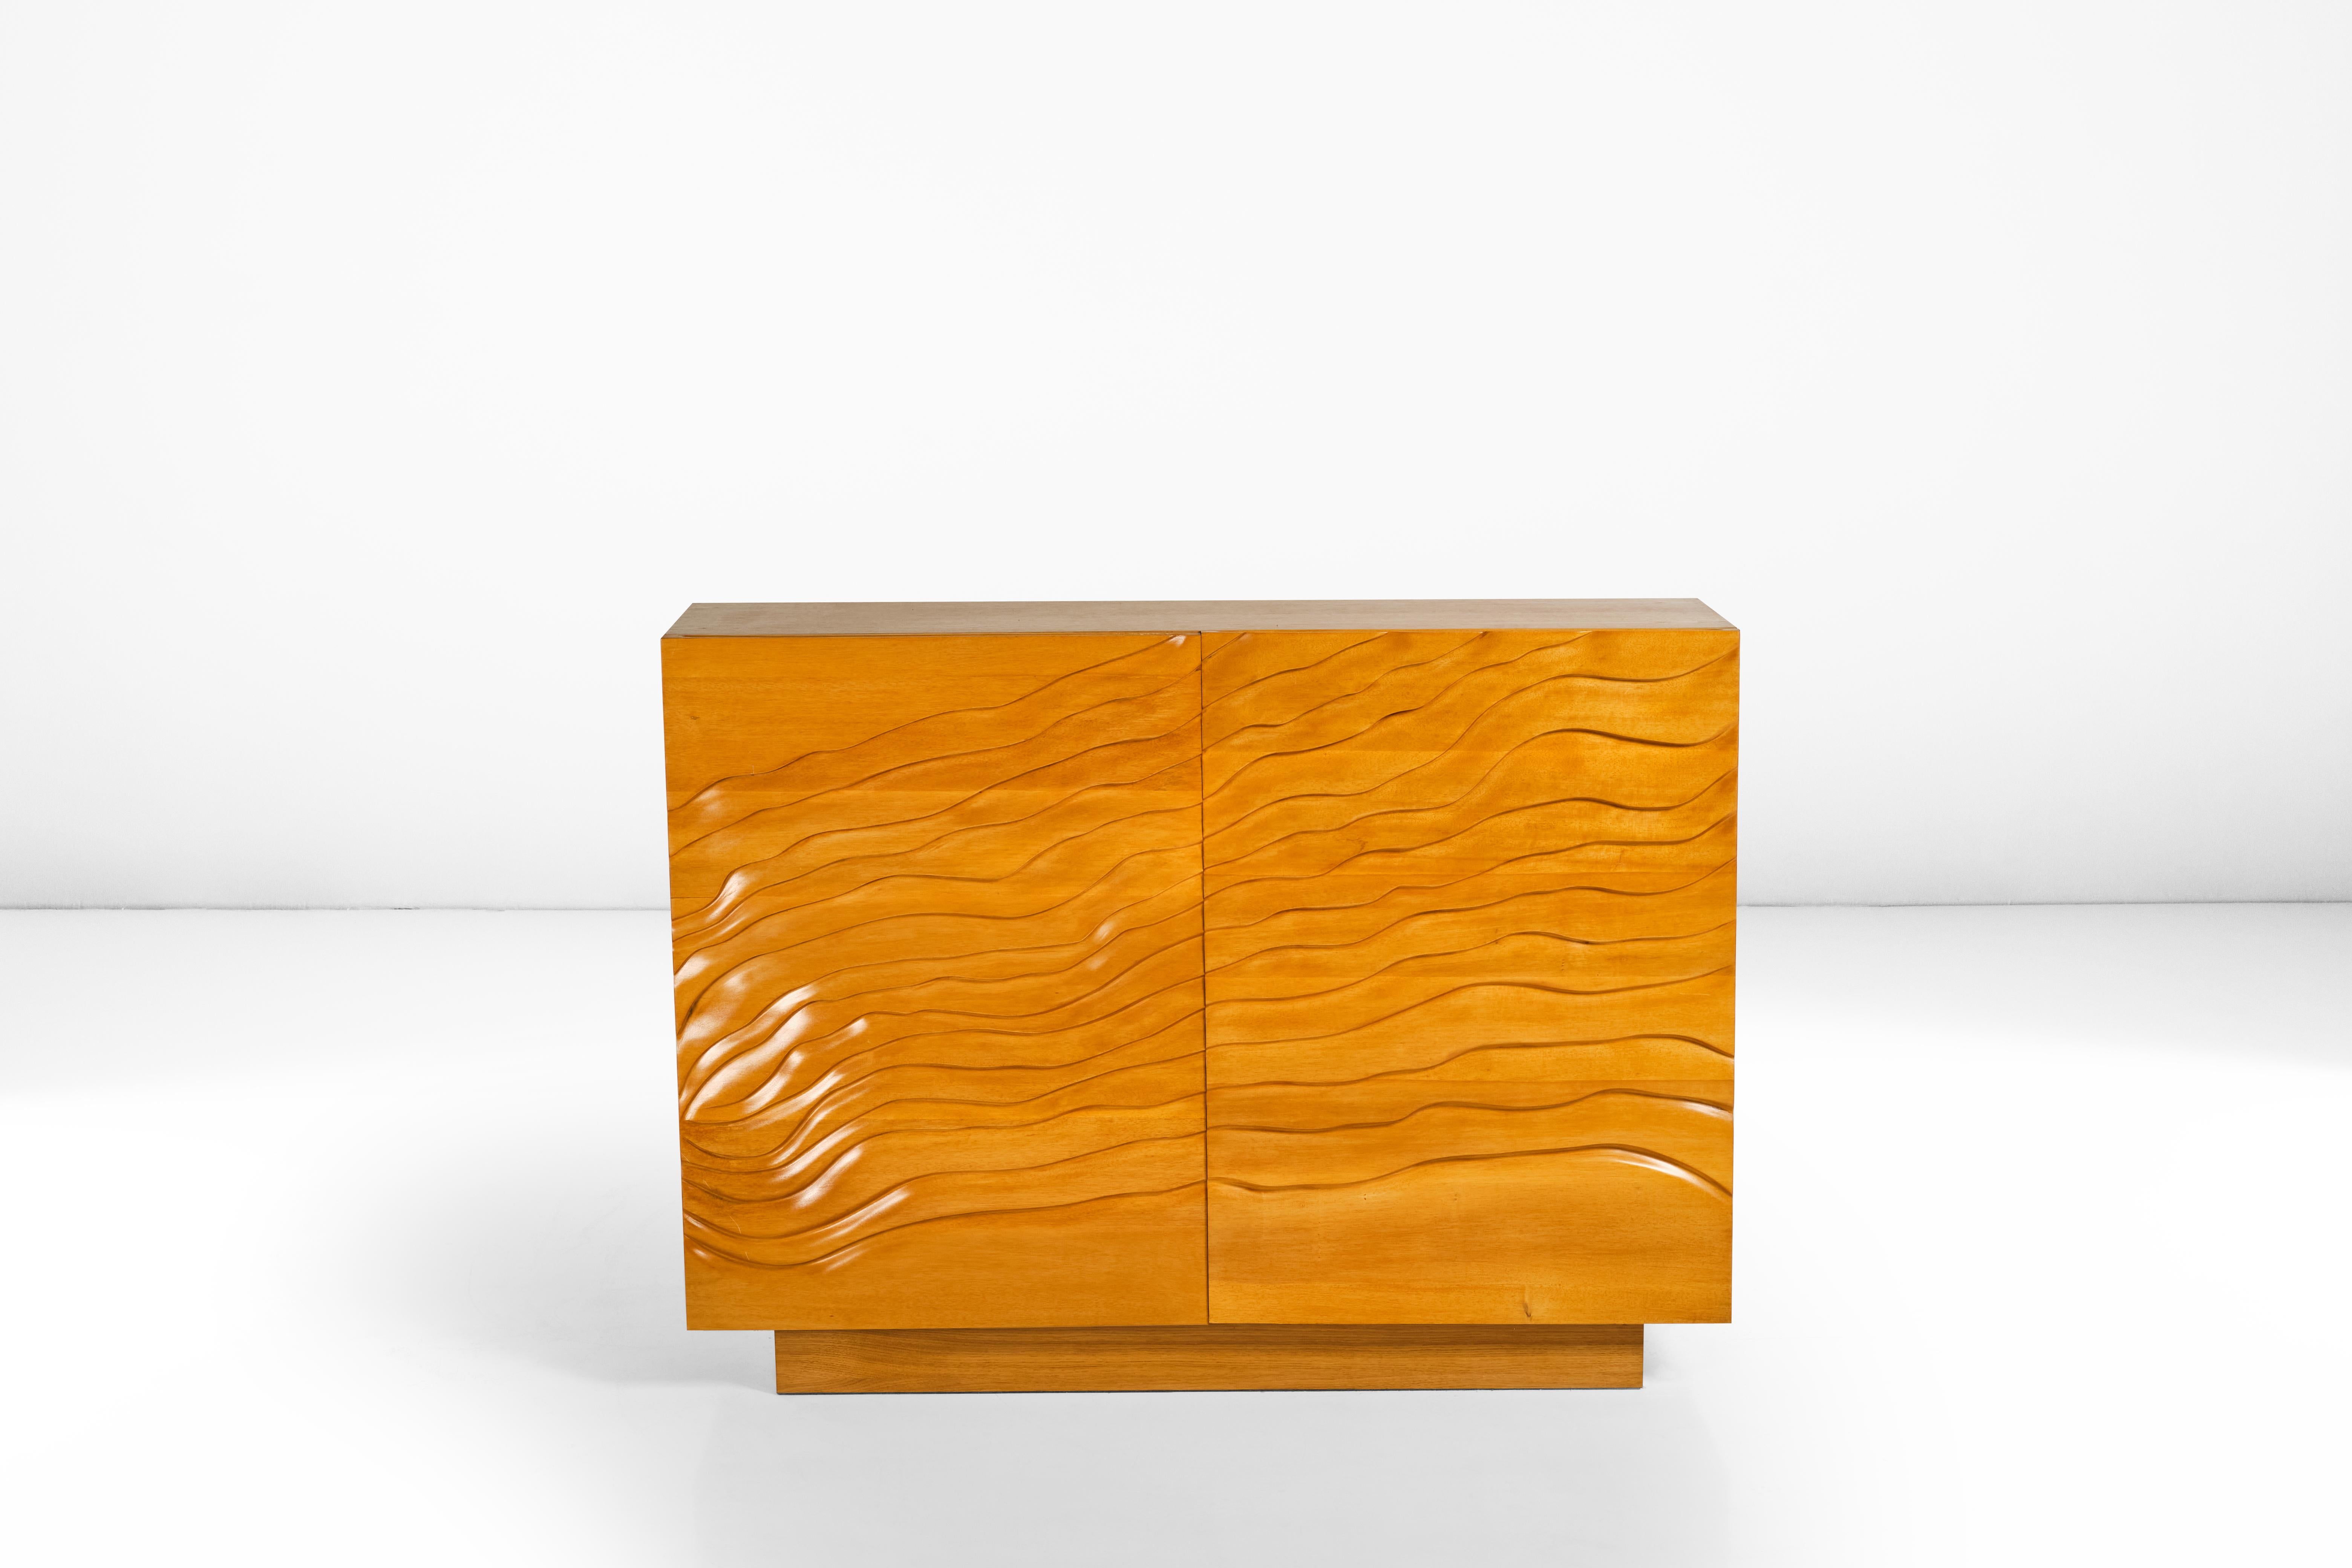 Pair of Sculptural Cabinets, Italian Design, 1960 circa For Sale 1